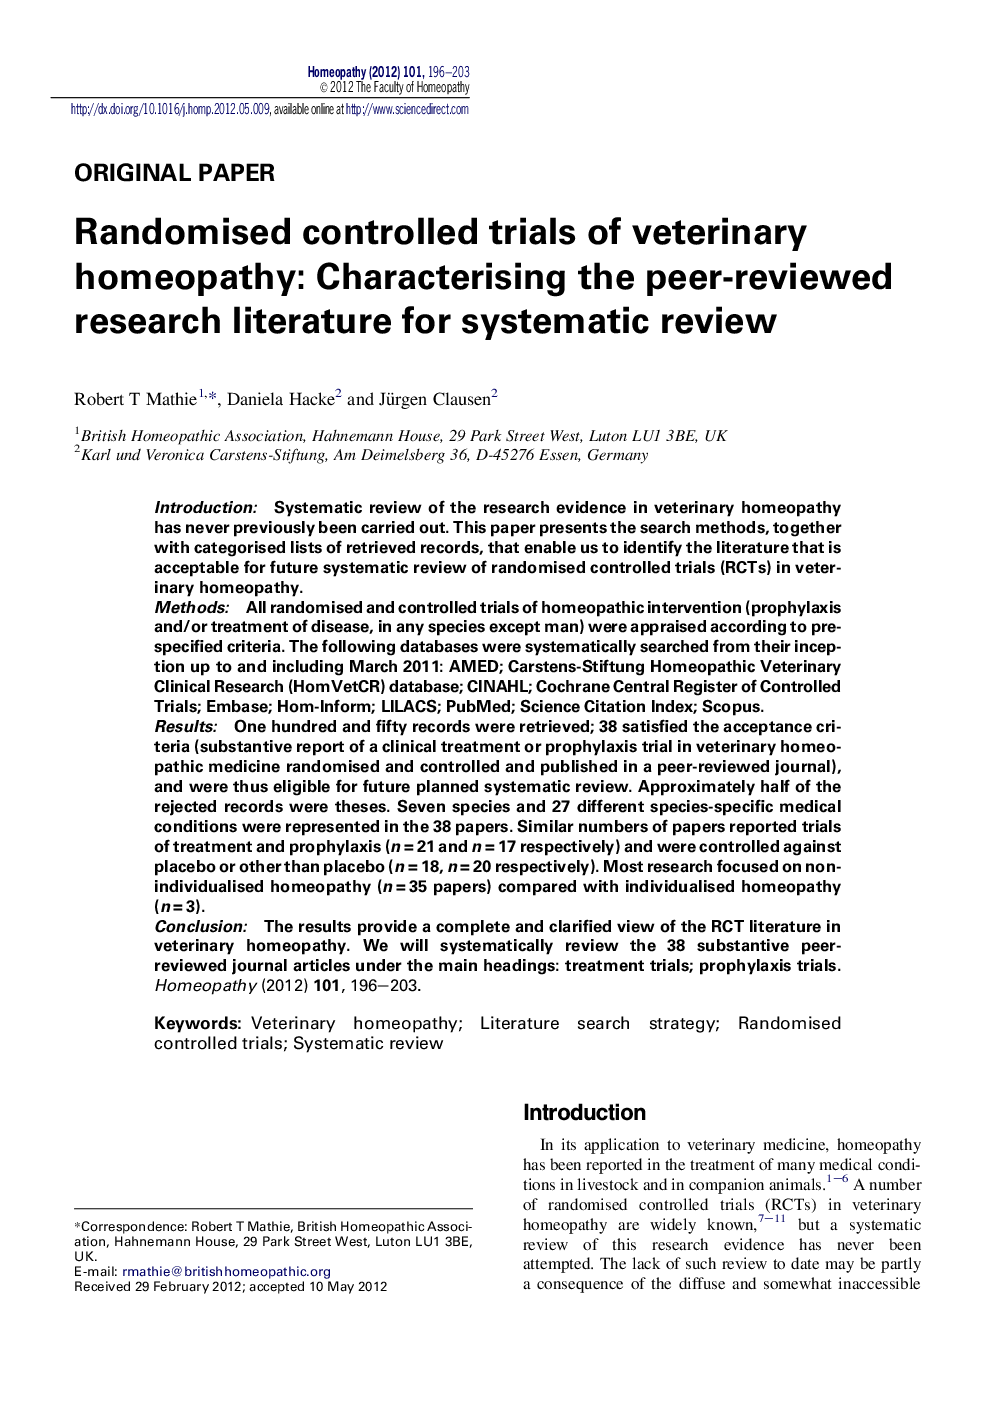 Randomised controlled trials of veterinary homeopathy: Characterising the peer-reviewed research literature for systematic review